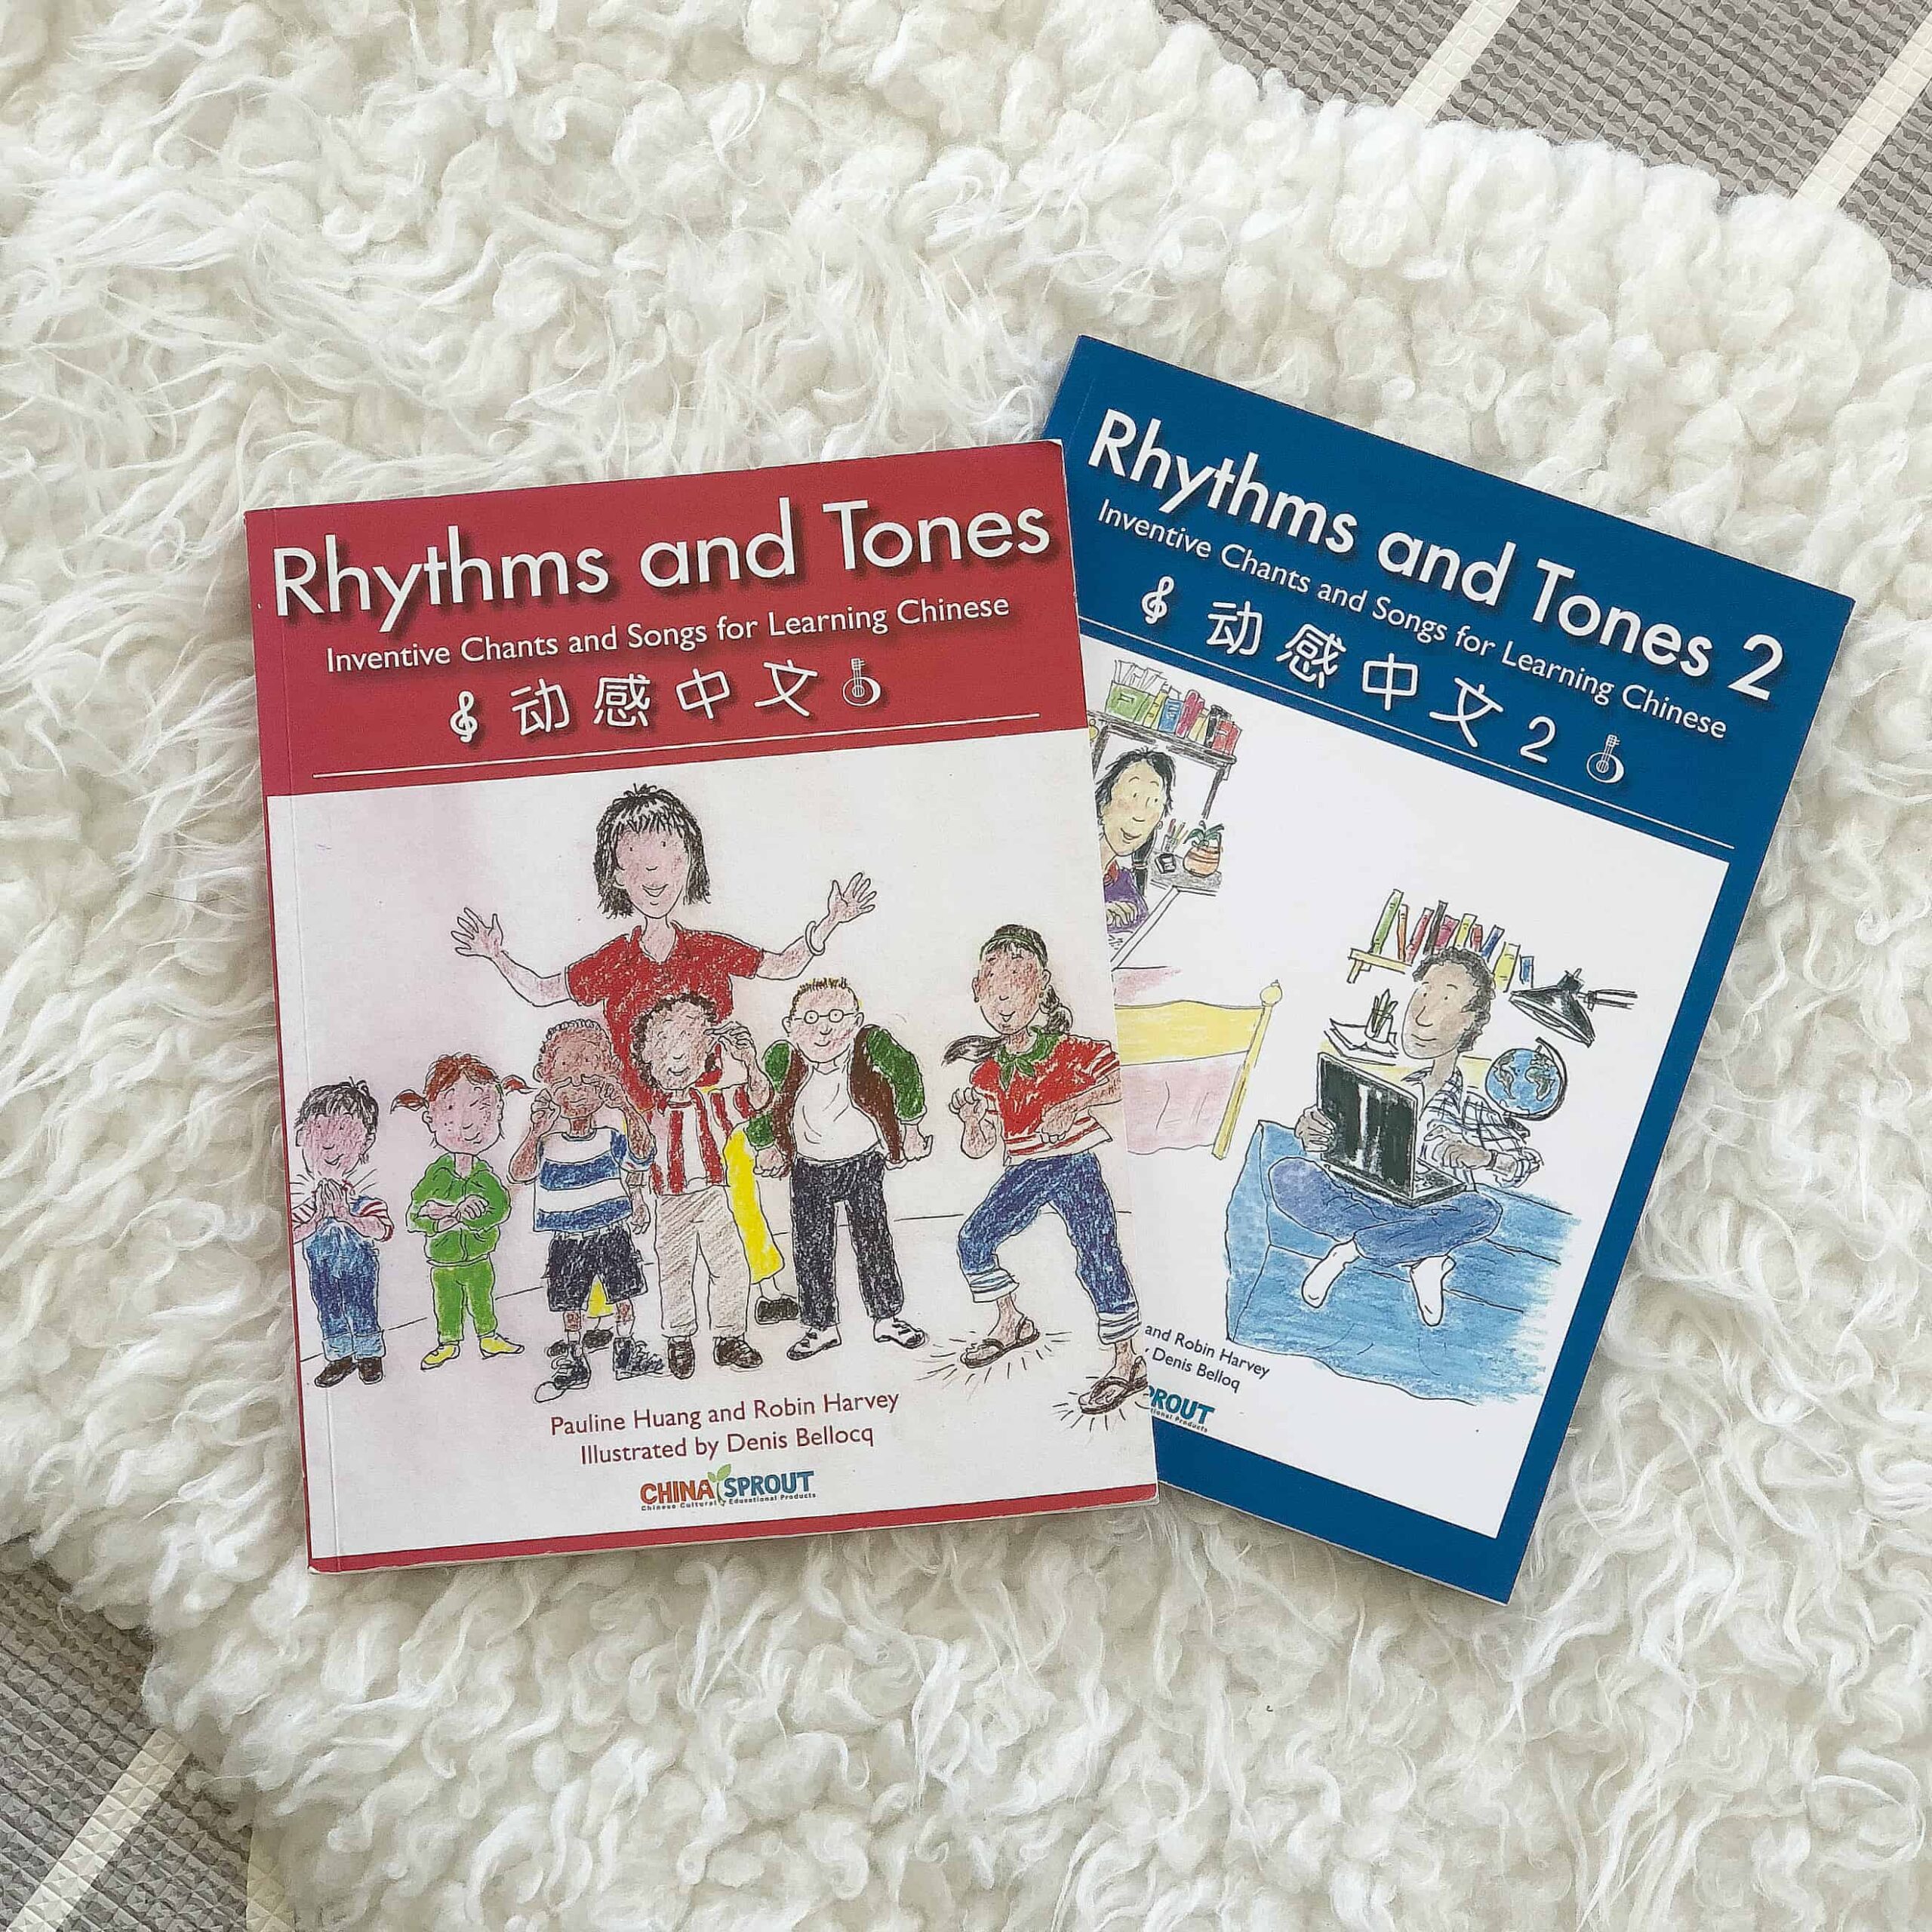 Rhythm and Tones Chants and Songs for Learning Chinese